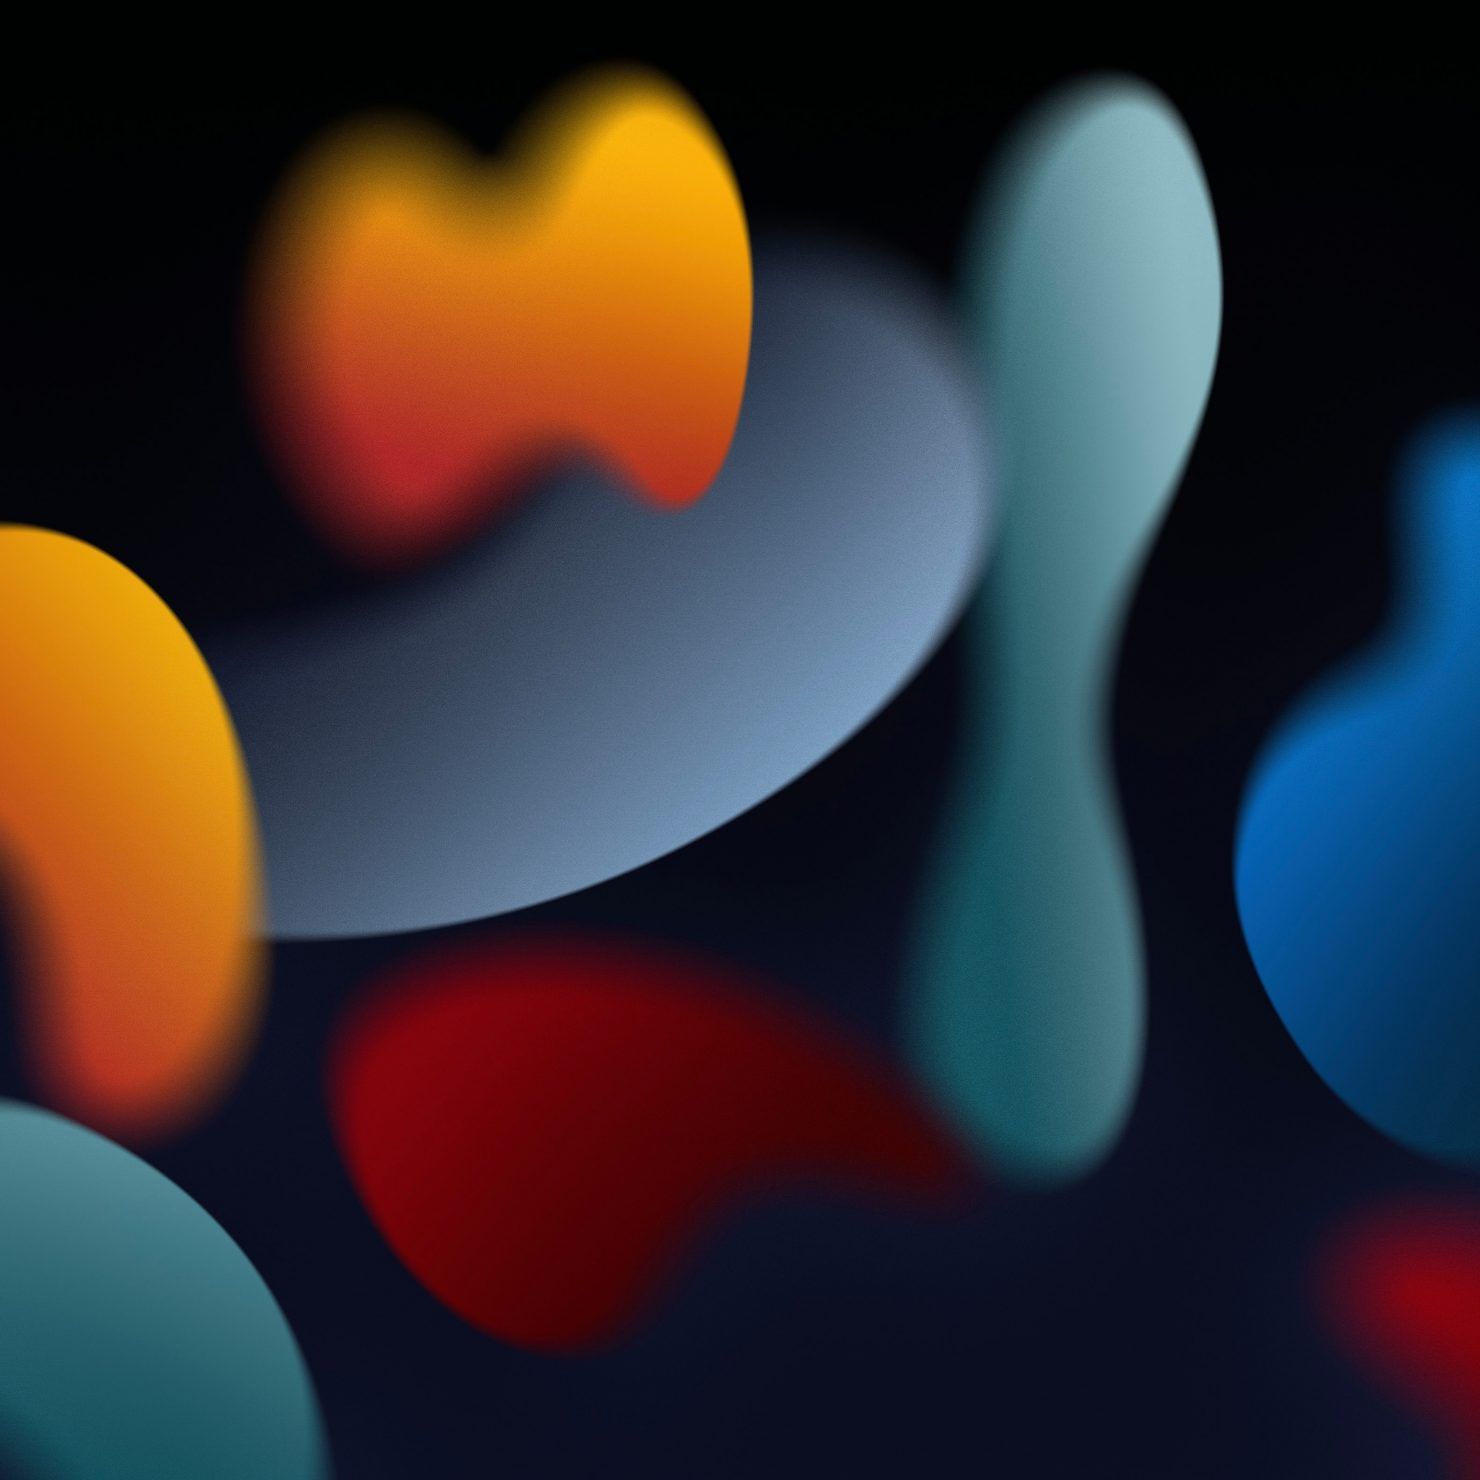 Download the New iOS 15 and iPadOS 15 Wallpaper [Light and Dark]